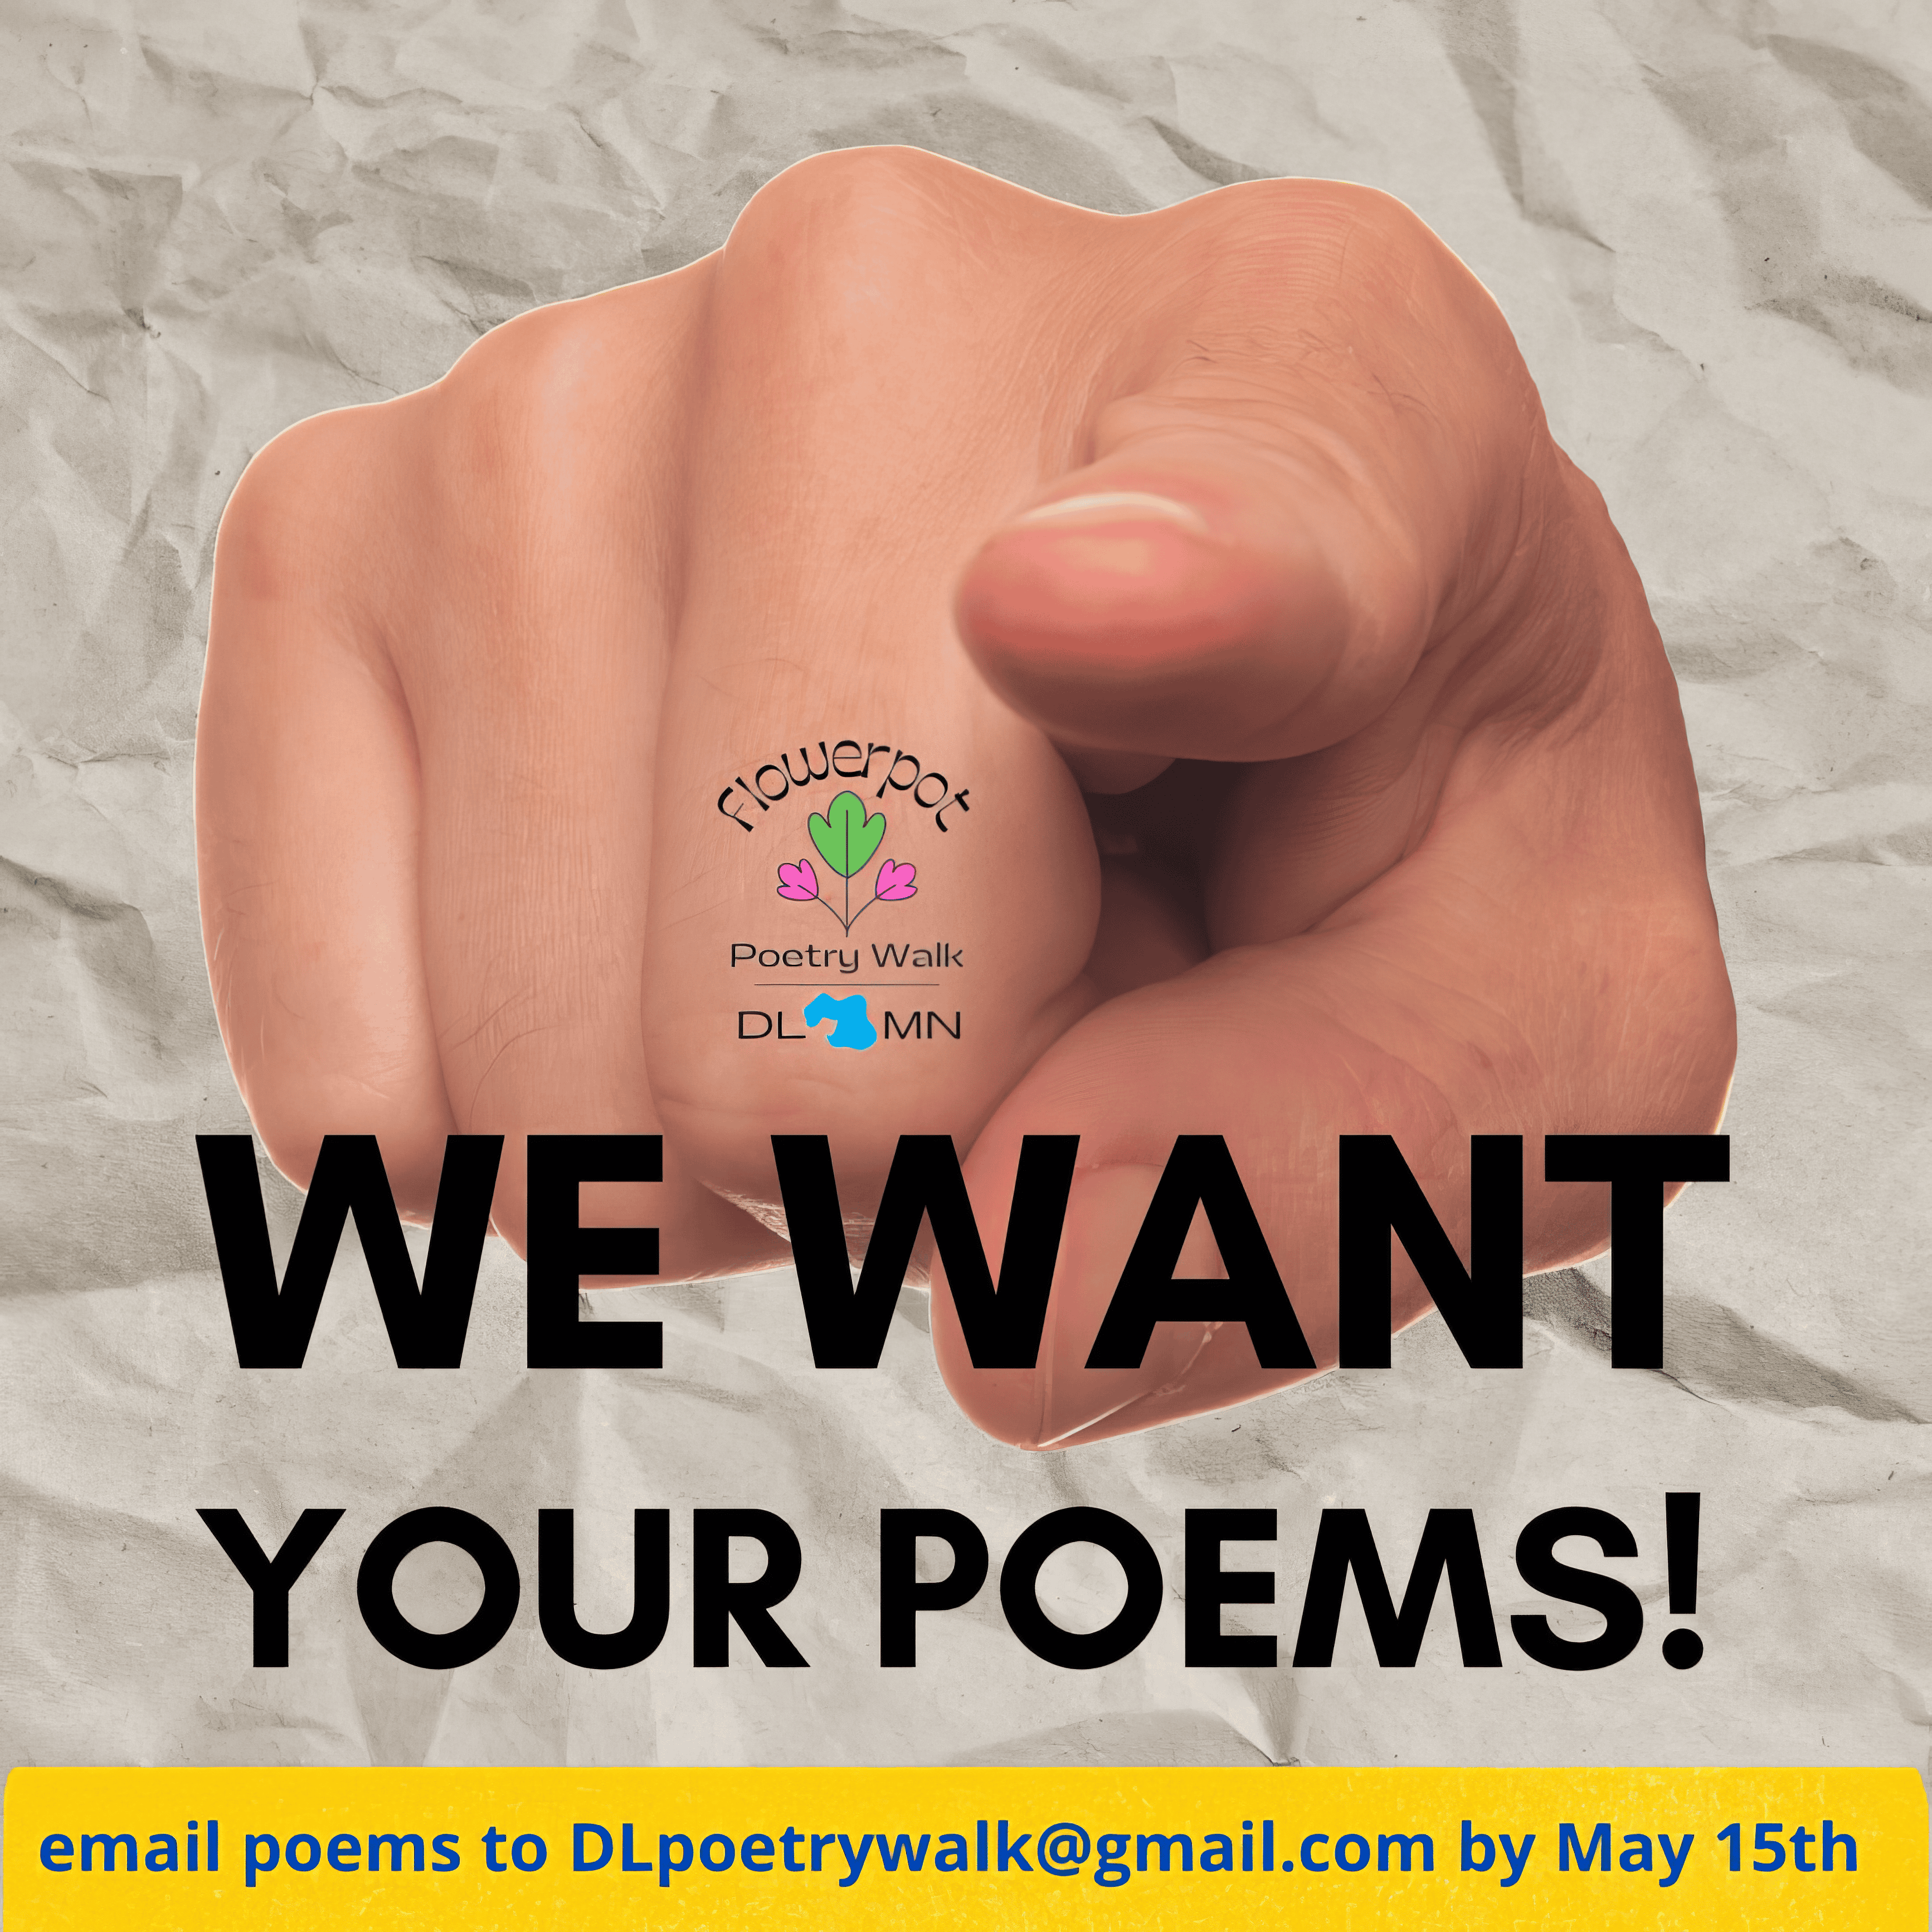 We want your poems! Finger pointing to you! email poems to DLpoetrywalk@gmail.com by May 15th